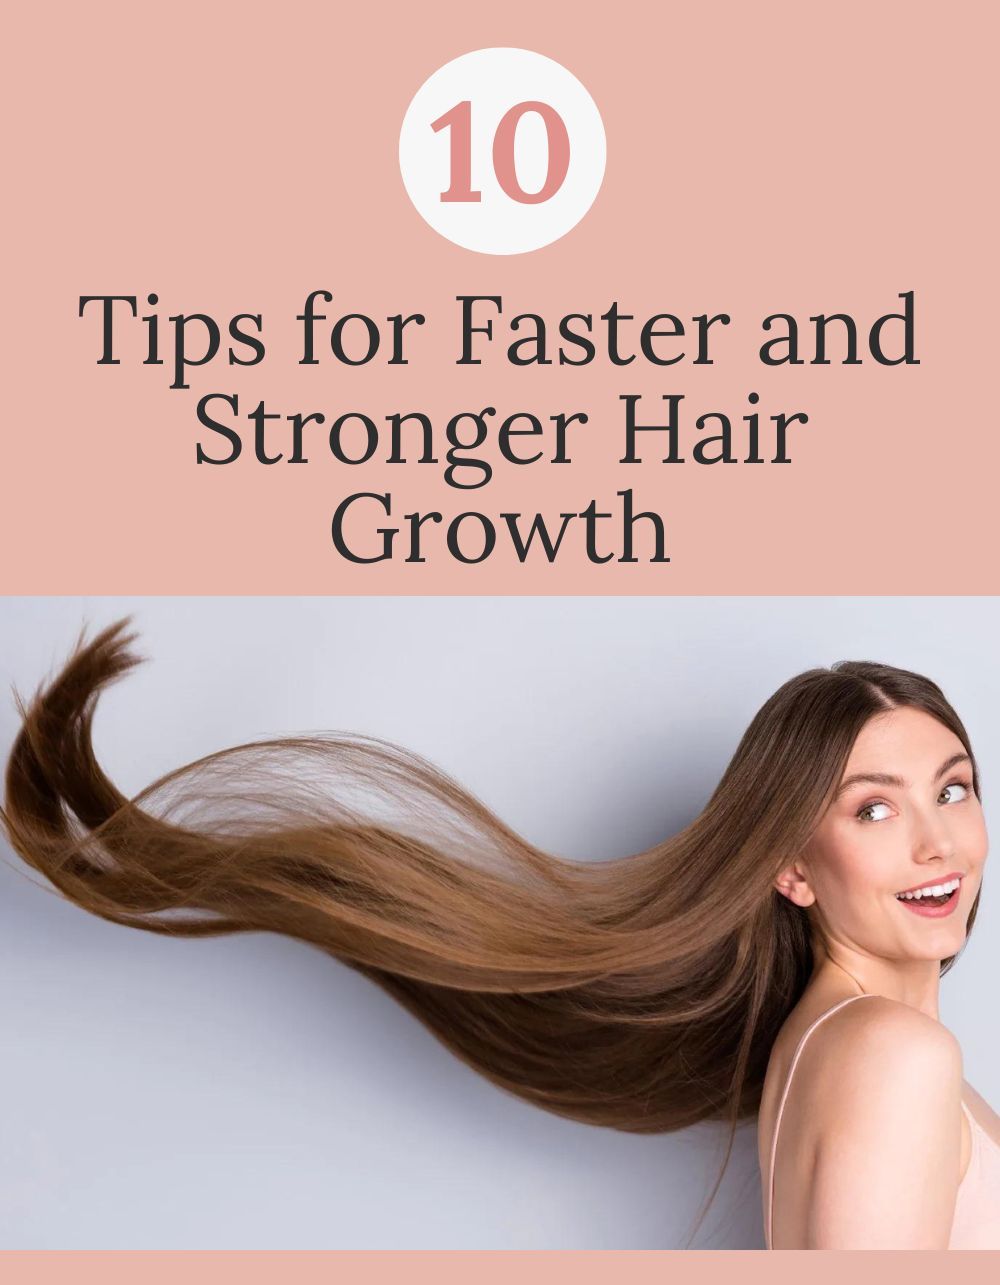 10 Tips for Faster and Stronger Hair Growth